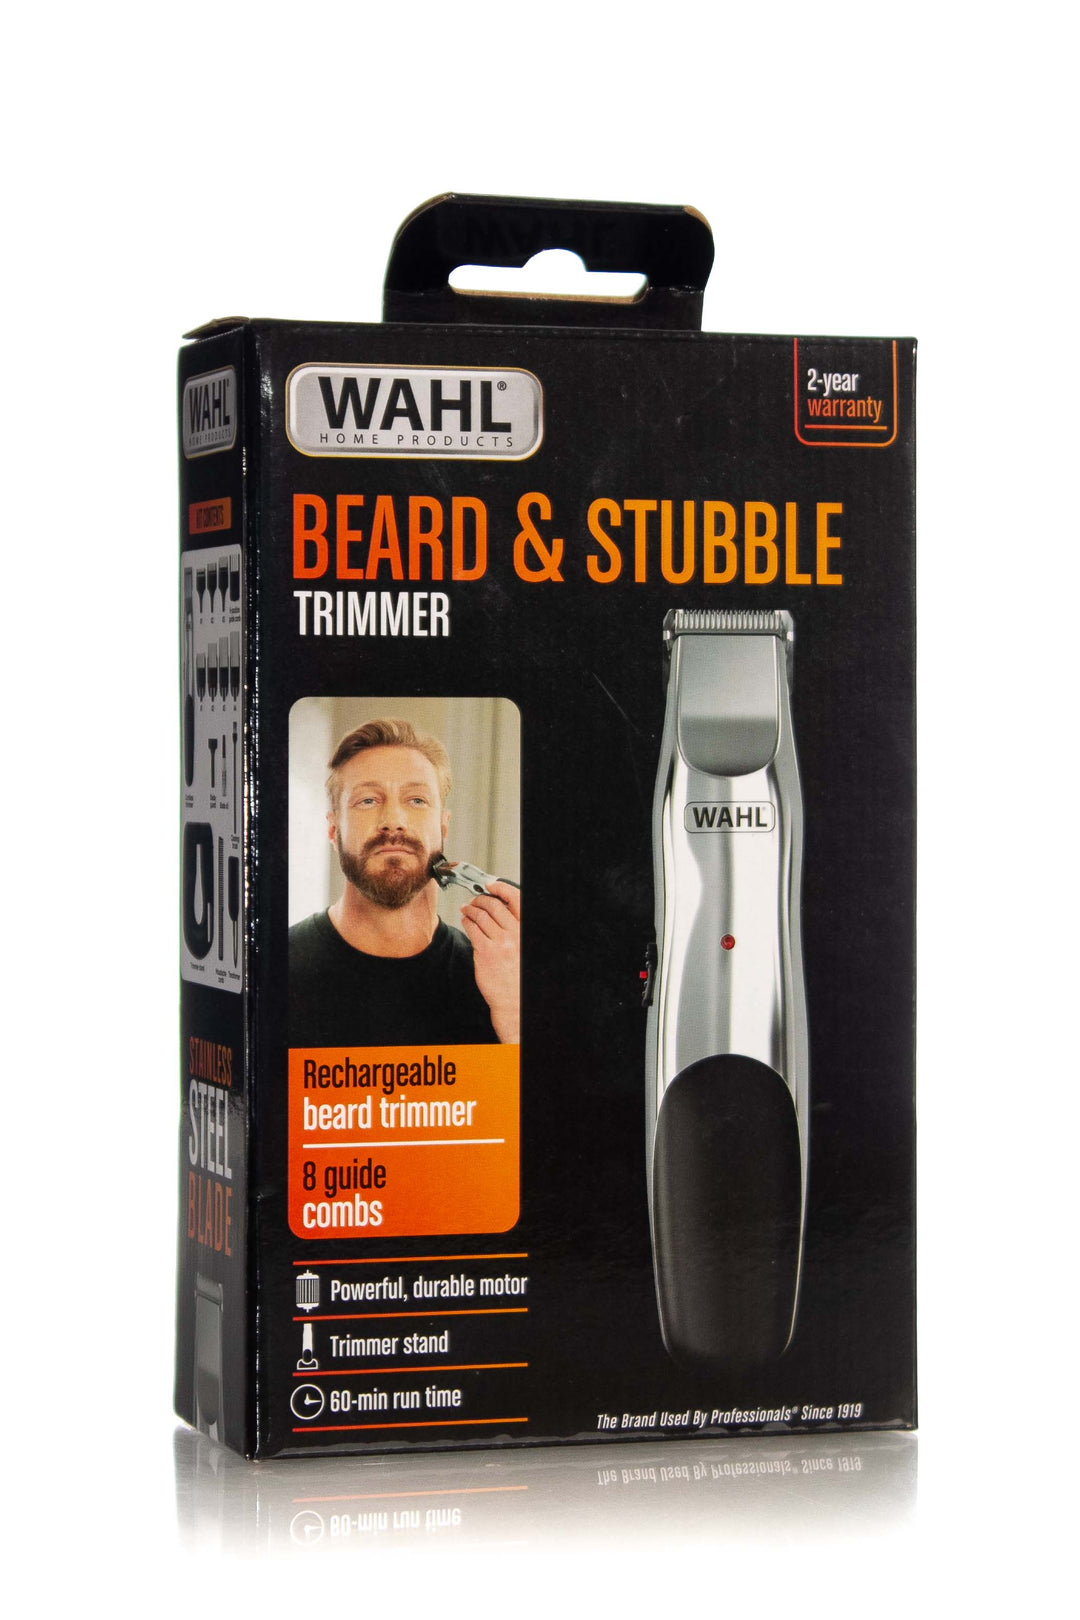 WAHL BEARD & STUBBLE RECHARGEABLE TRIMMER